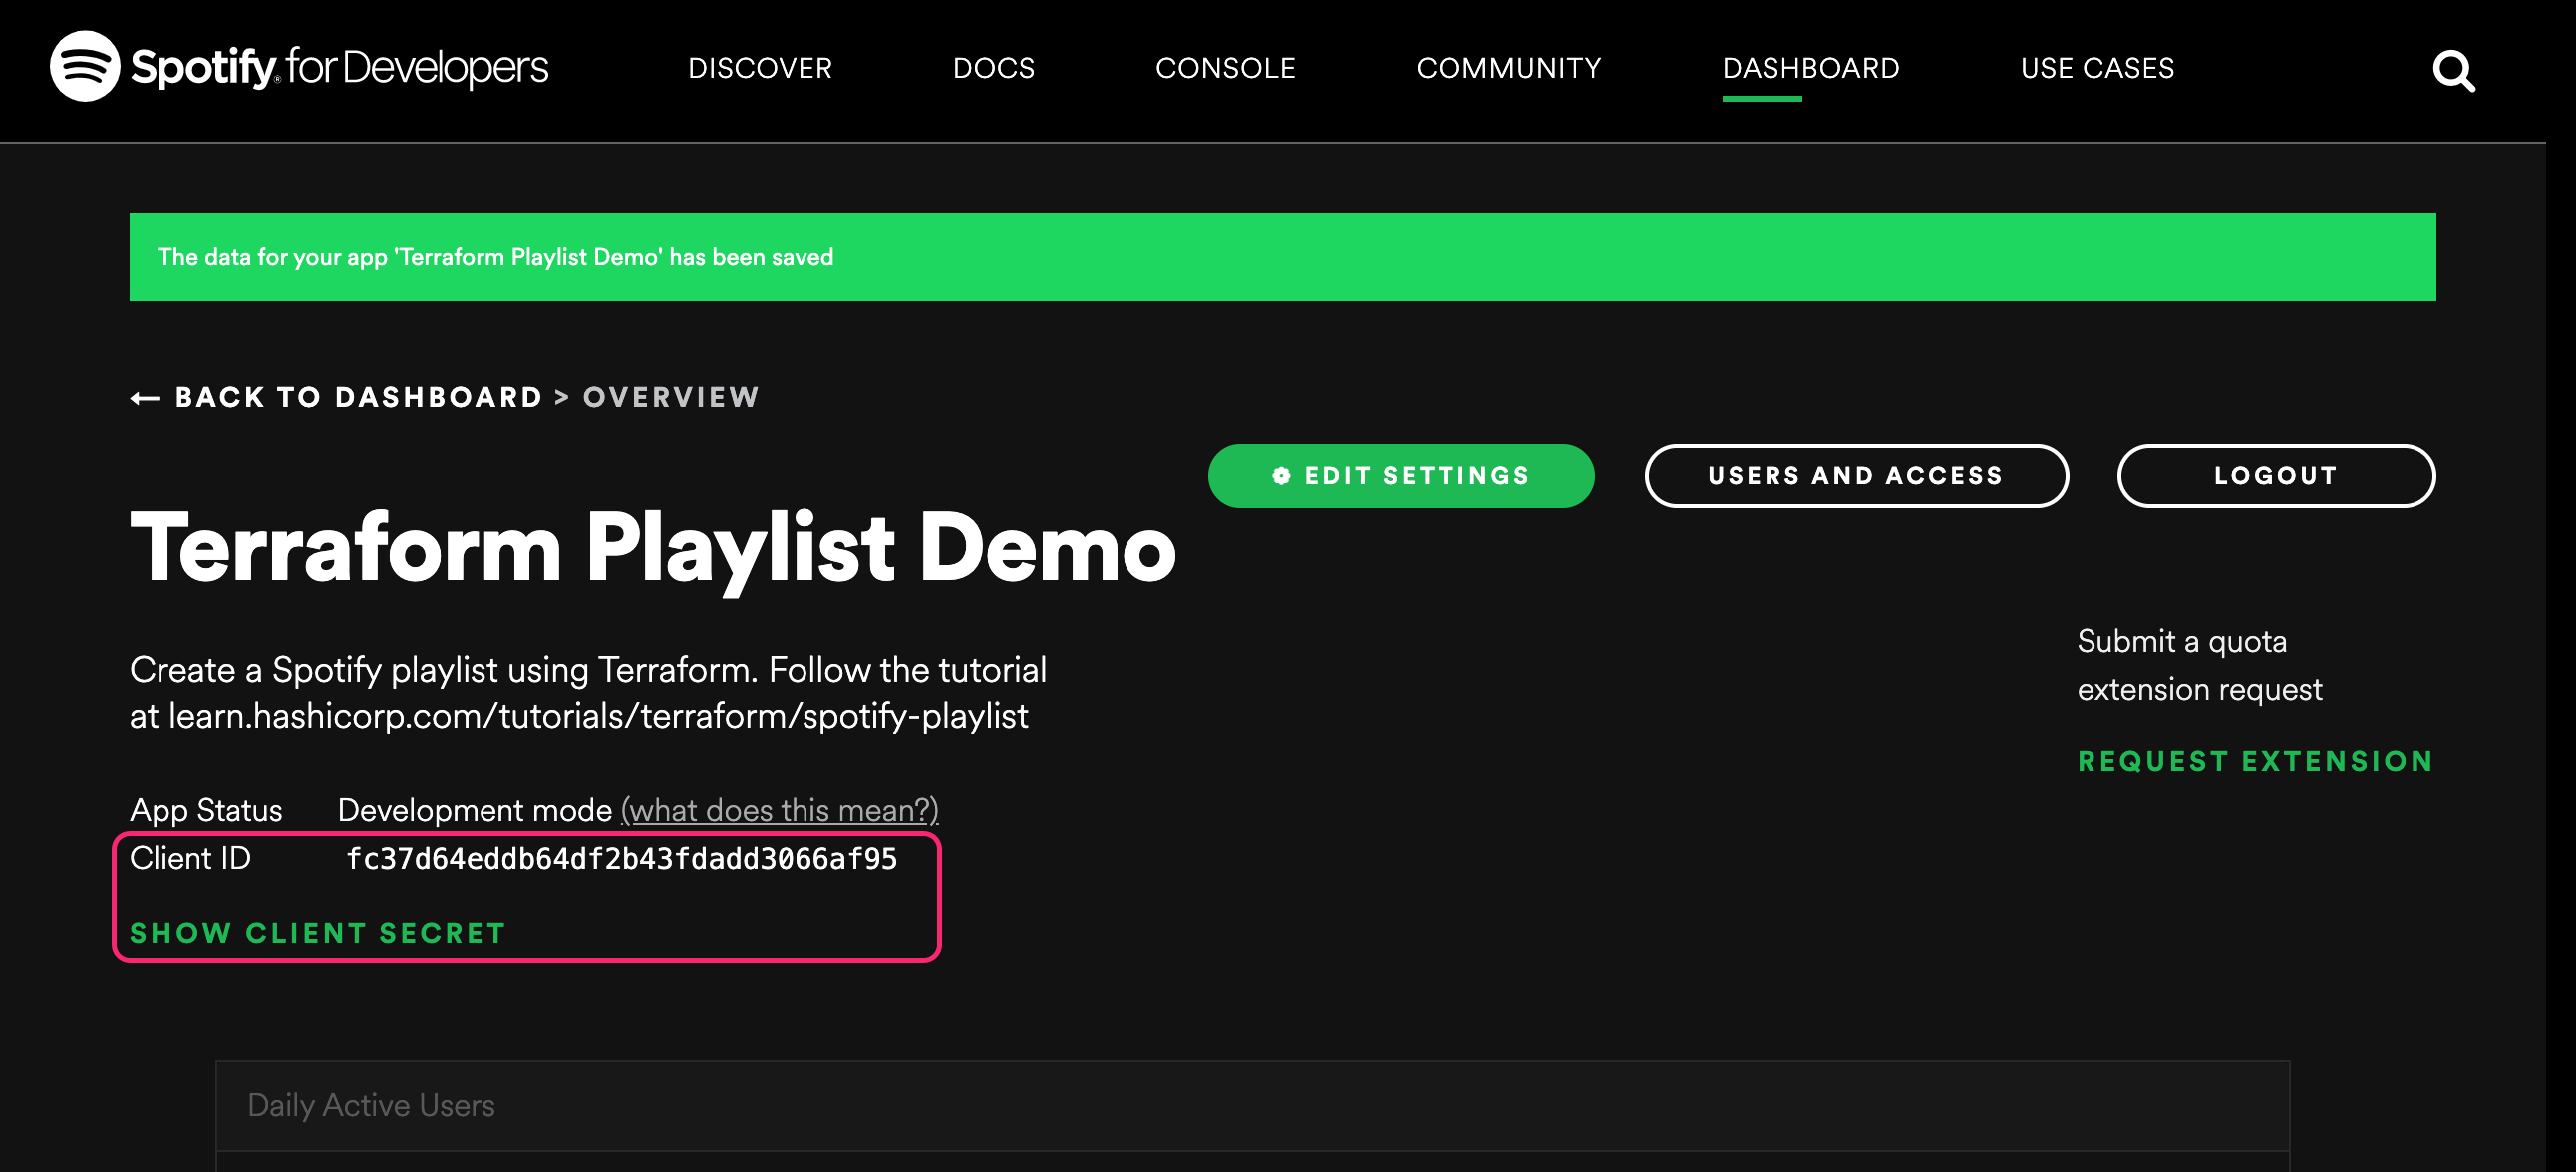 Spotify Developer portal app page with the client ID and secret